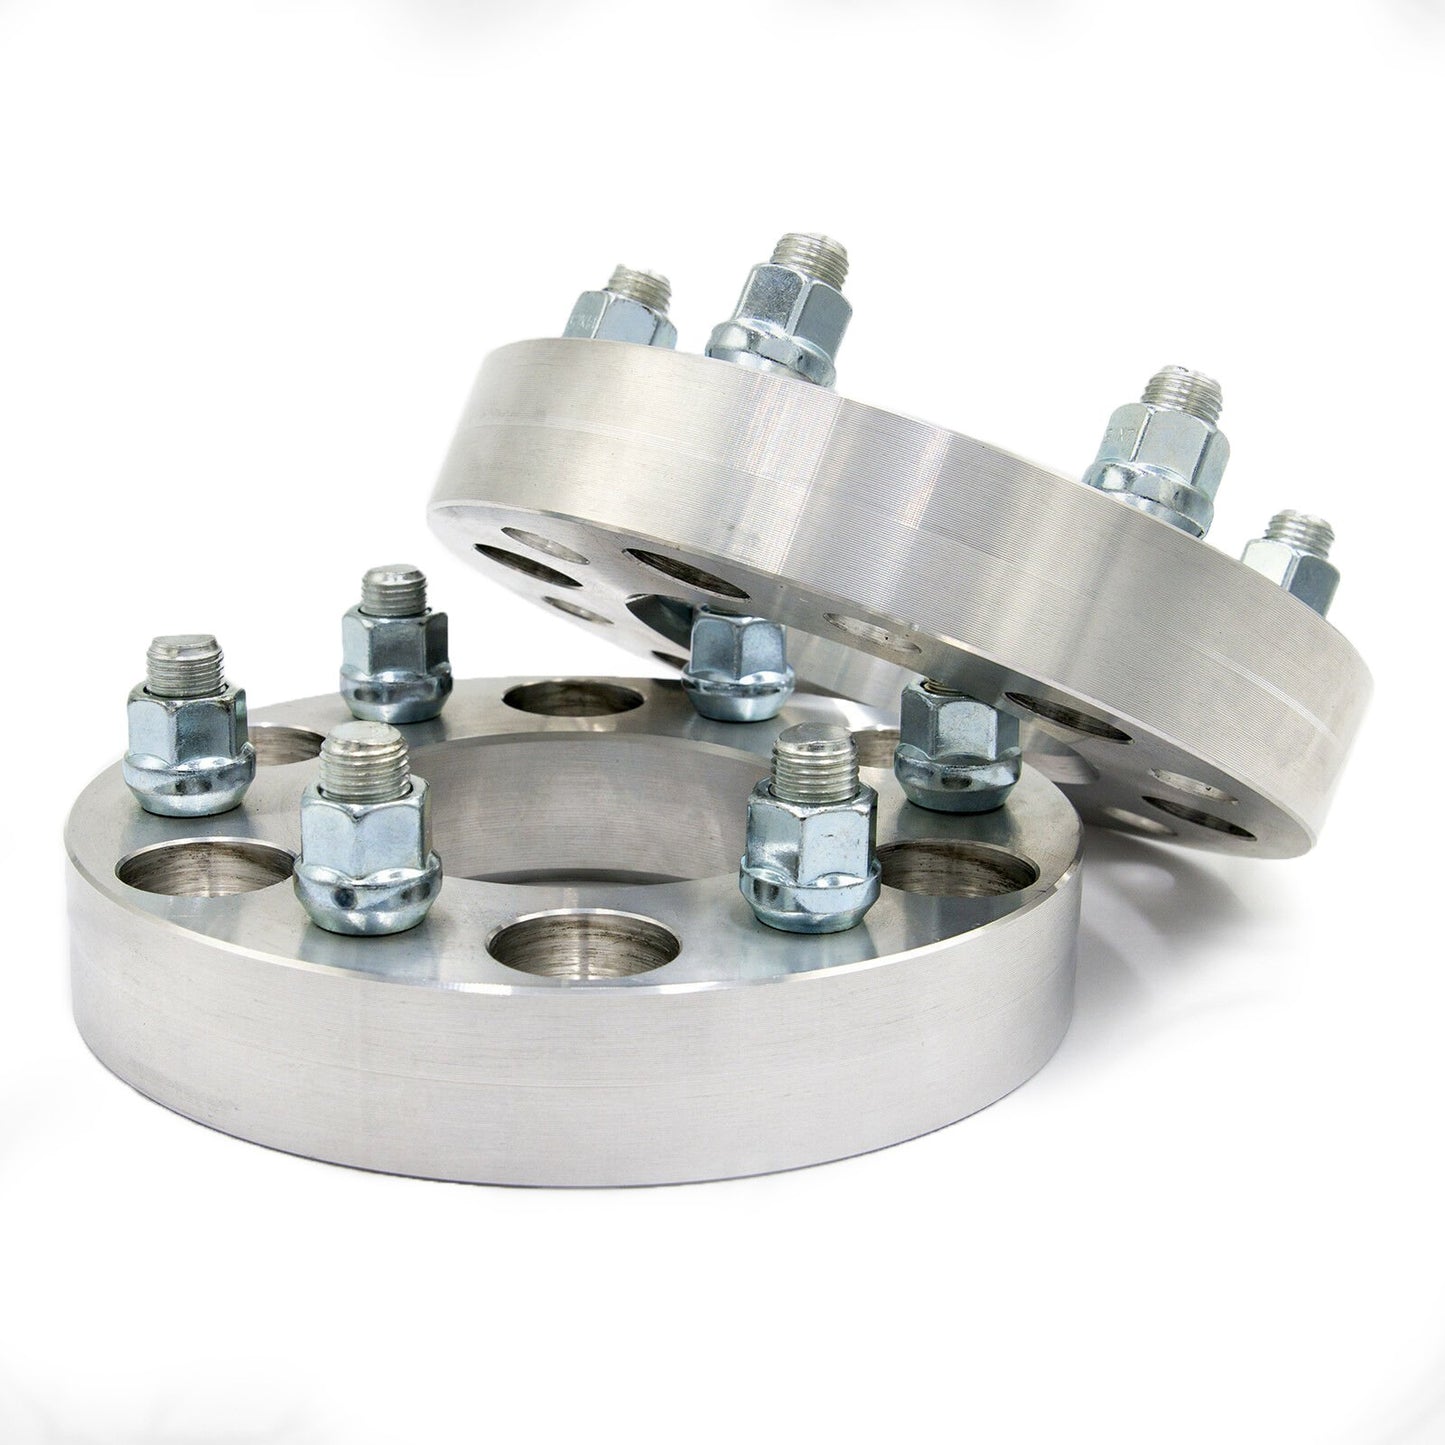 6x5" to 6x4.5" Wheel Spacer/Adapter - Thickness: 3/4"- 4"